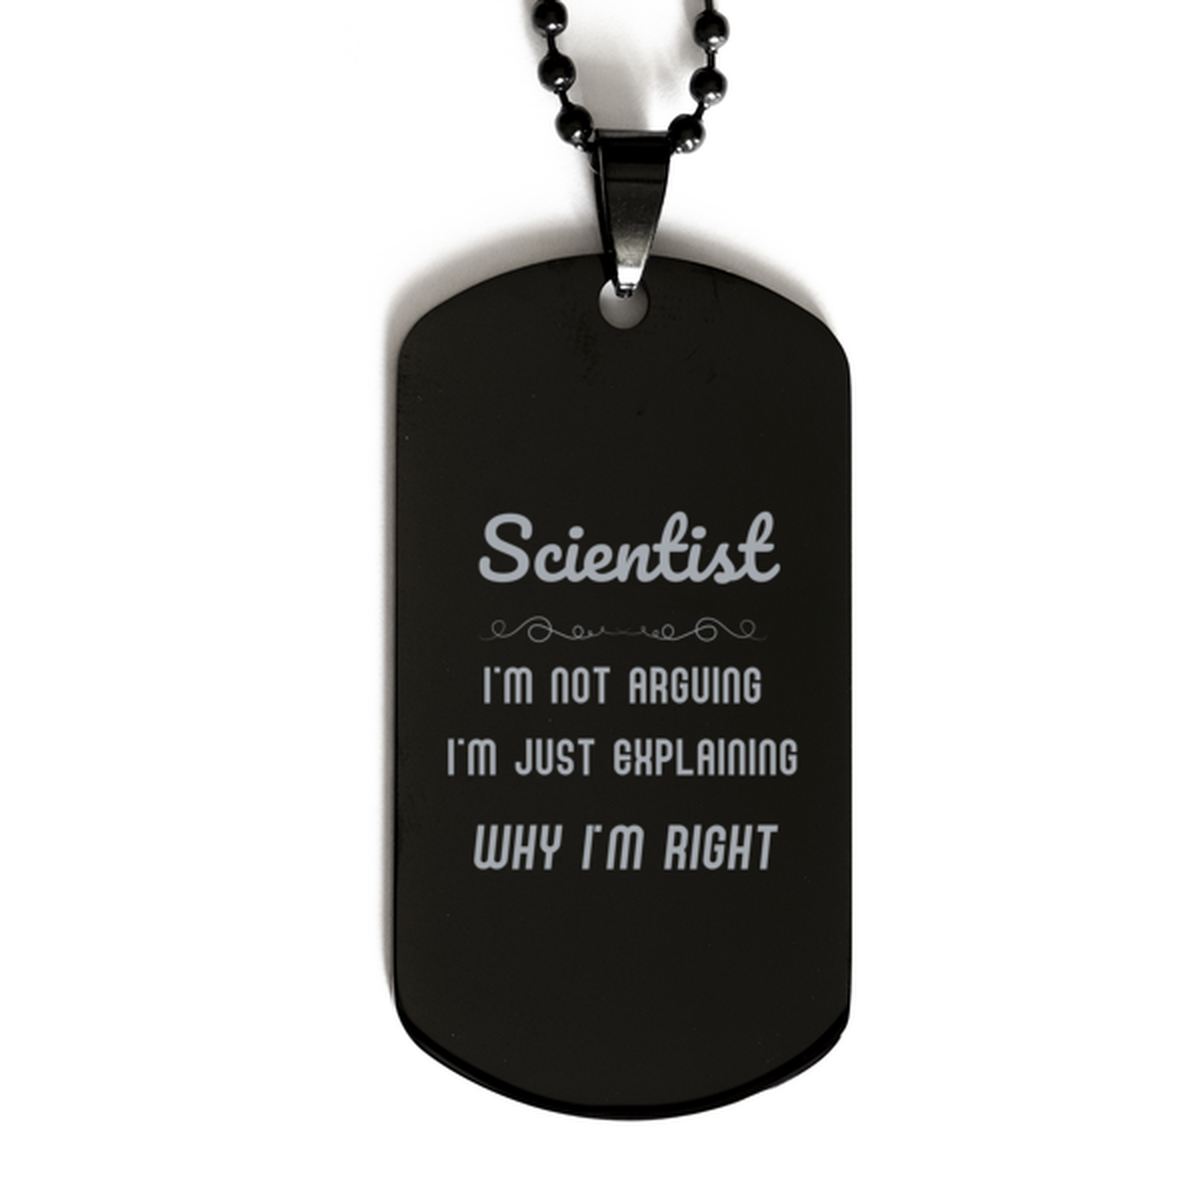 Scientist I'm not Arguing. I'm Just Explaining Why I'm RIGHT Black Dog Tag, Funny Saying Quote Scientist Gifts For Scientist Graduation Birthday Christmas Gifts for Men Women Coworker